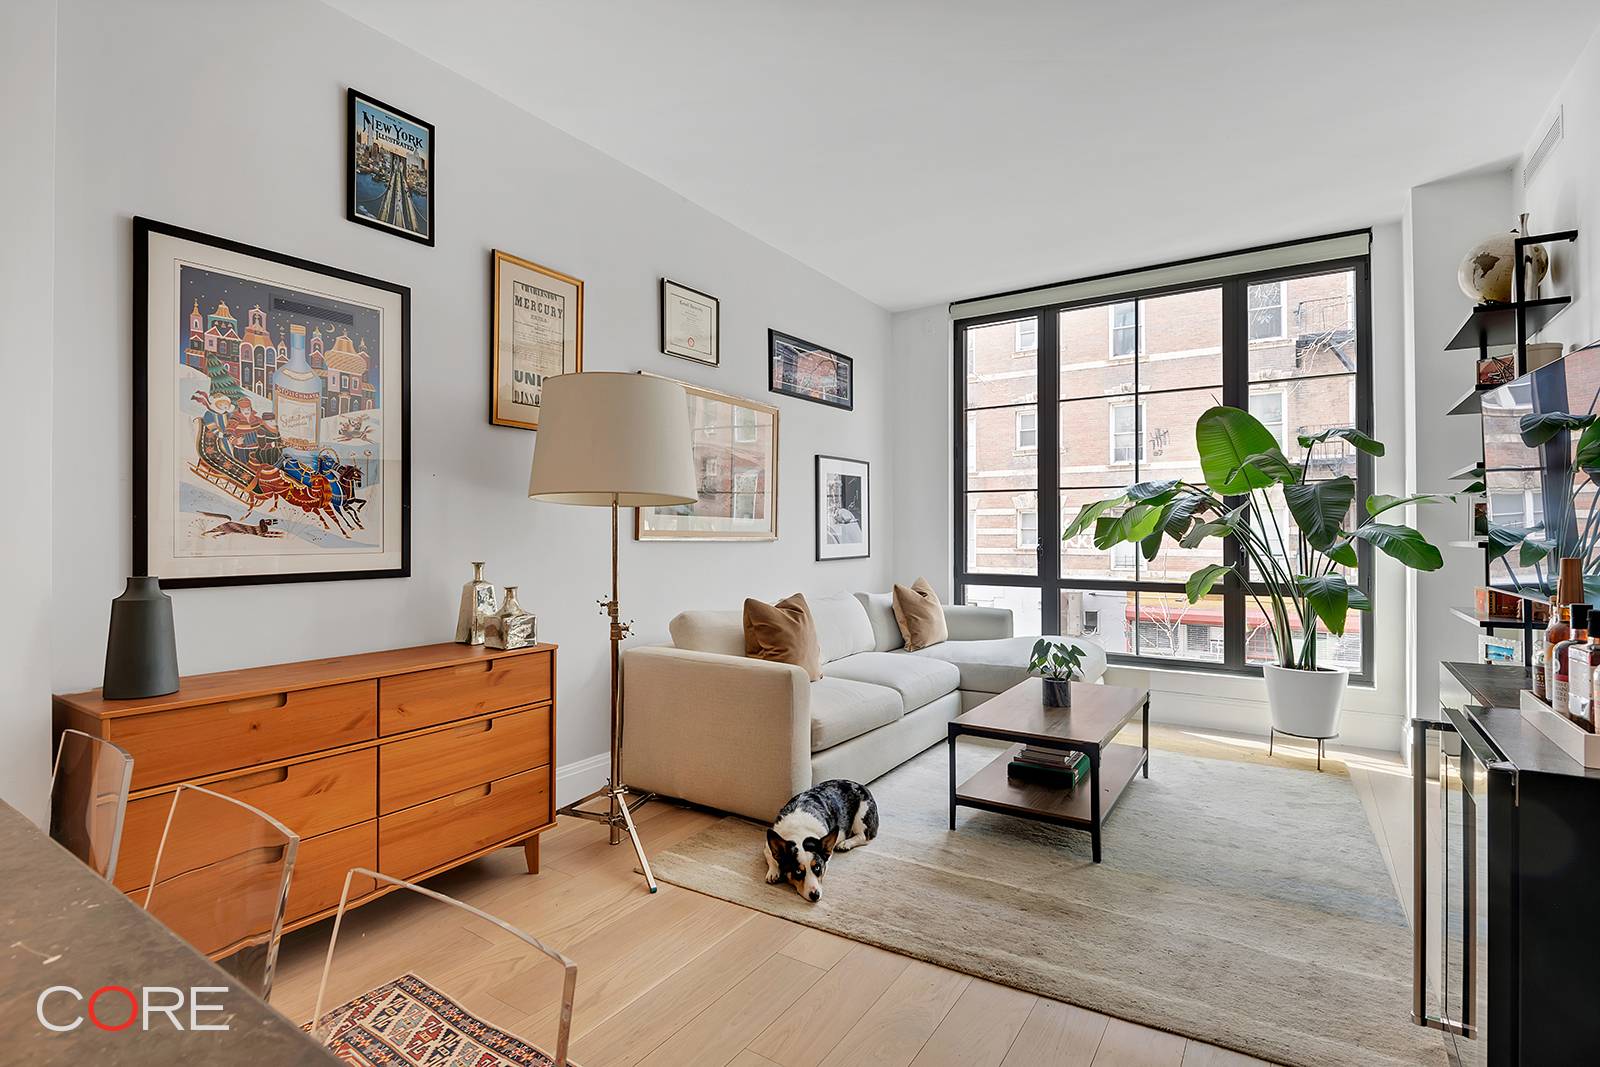 Welcome home to this sunlit one bedroom, one bath residence, boasting oversized casement windows, high ceilings, and bright southern views.